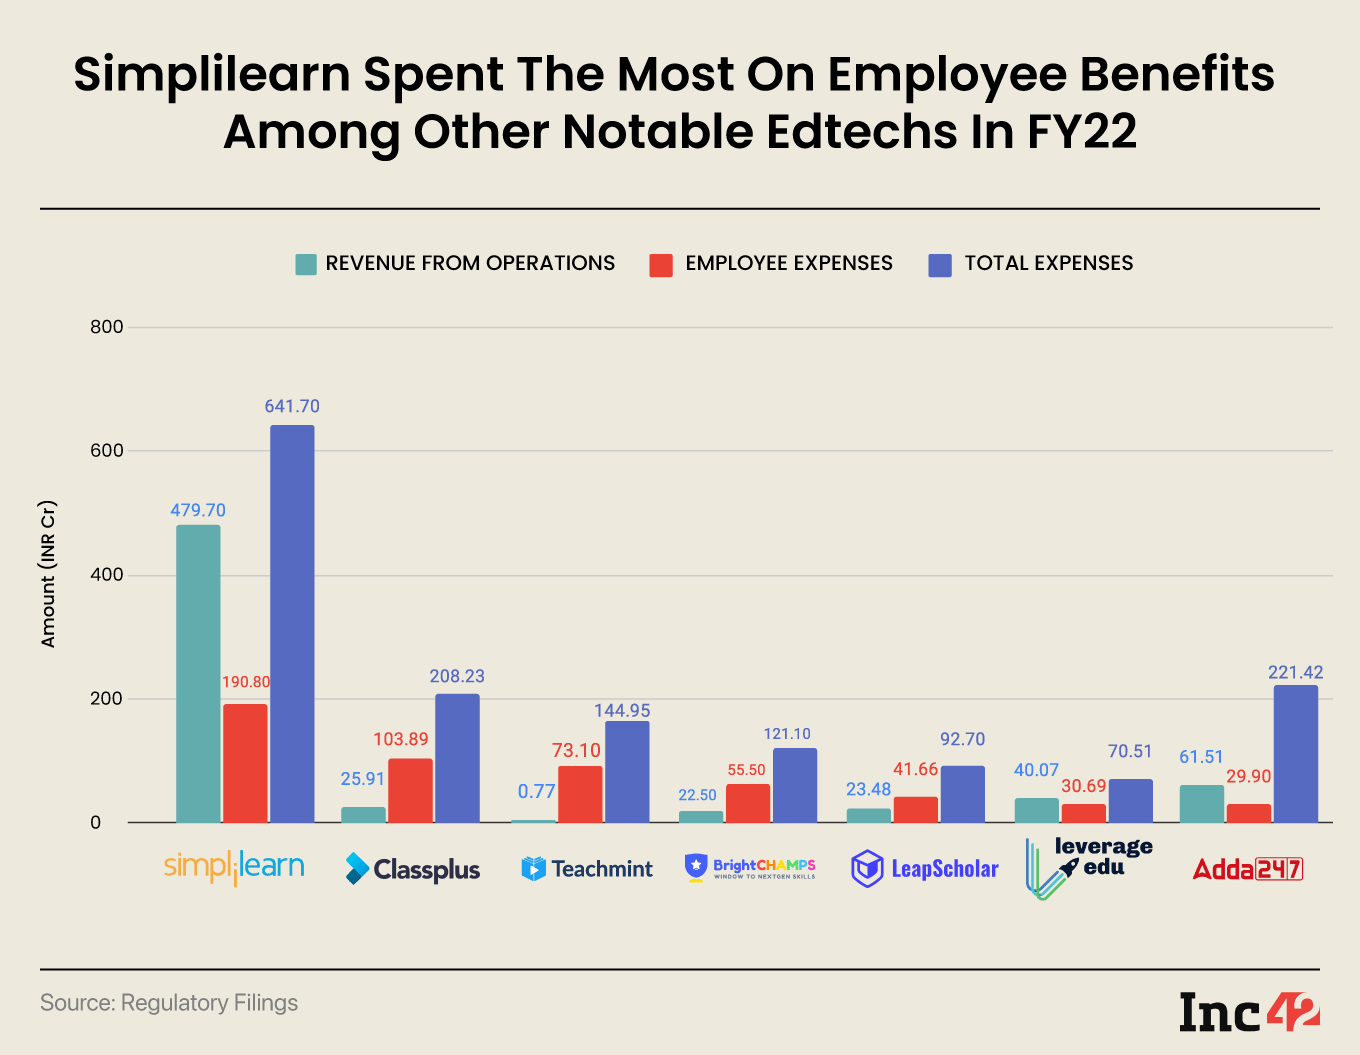 other major edtechs' employee expenses